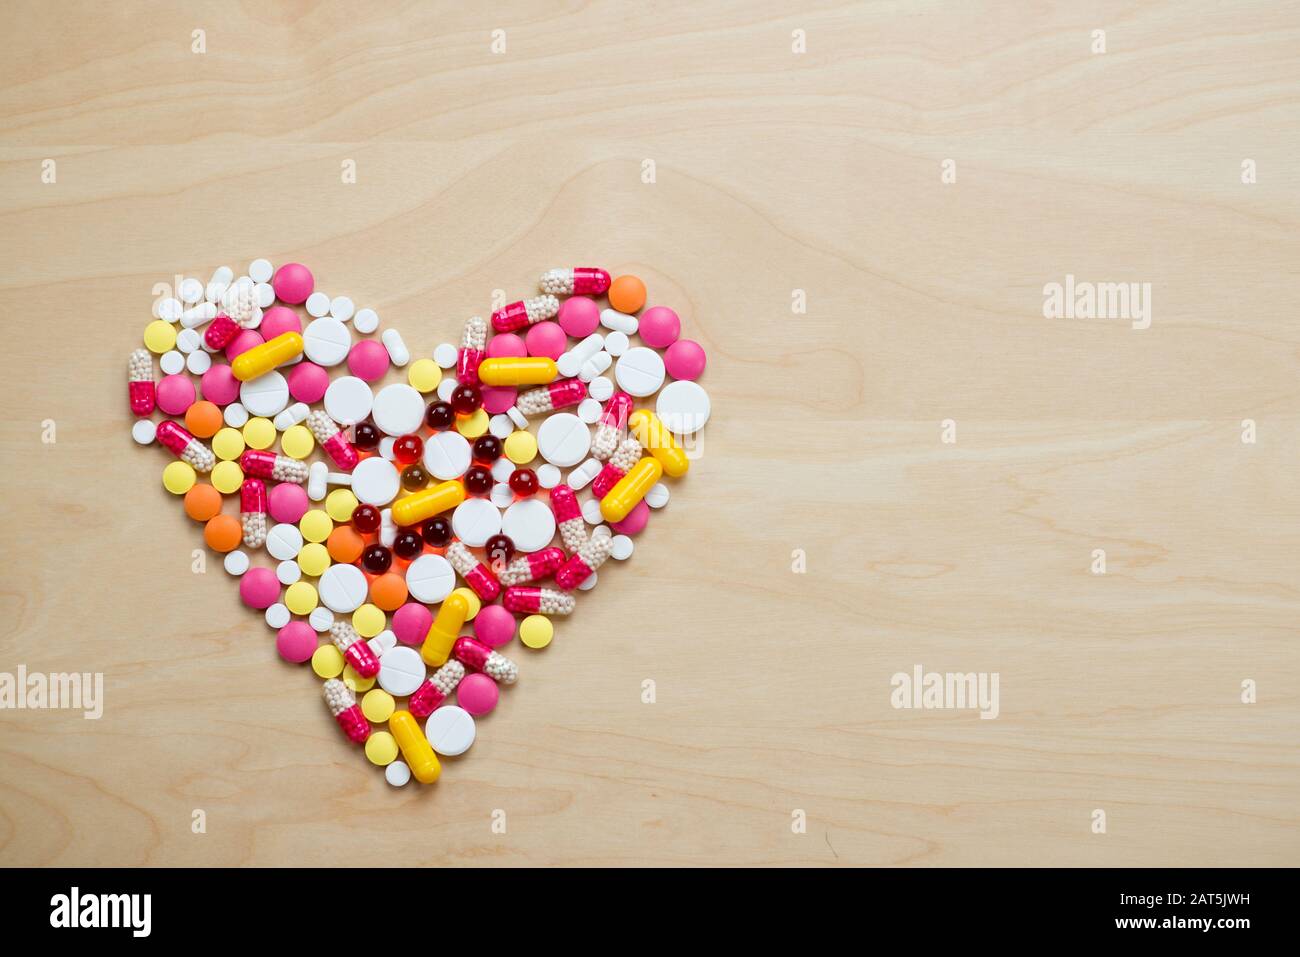 pills on the table depict a heart shape. Heart disease concept Stock Photo